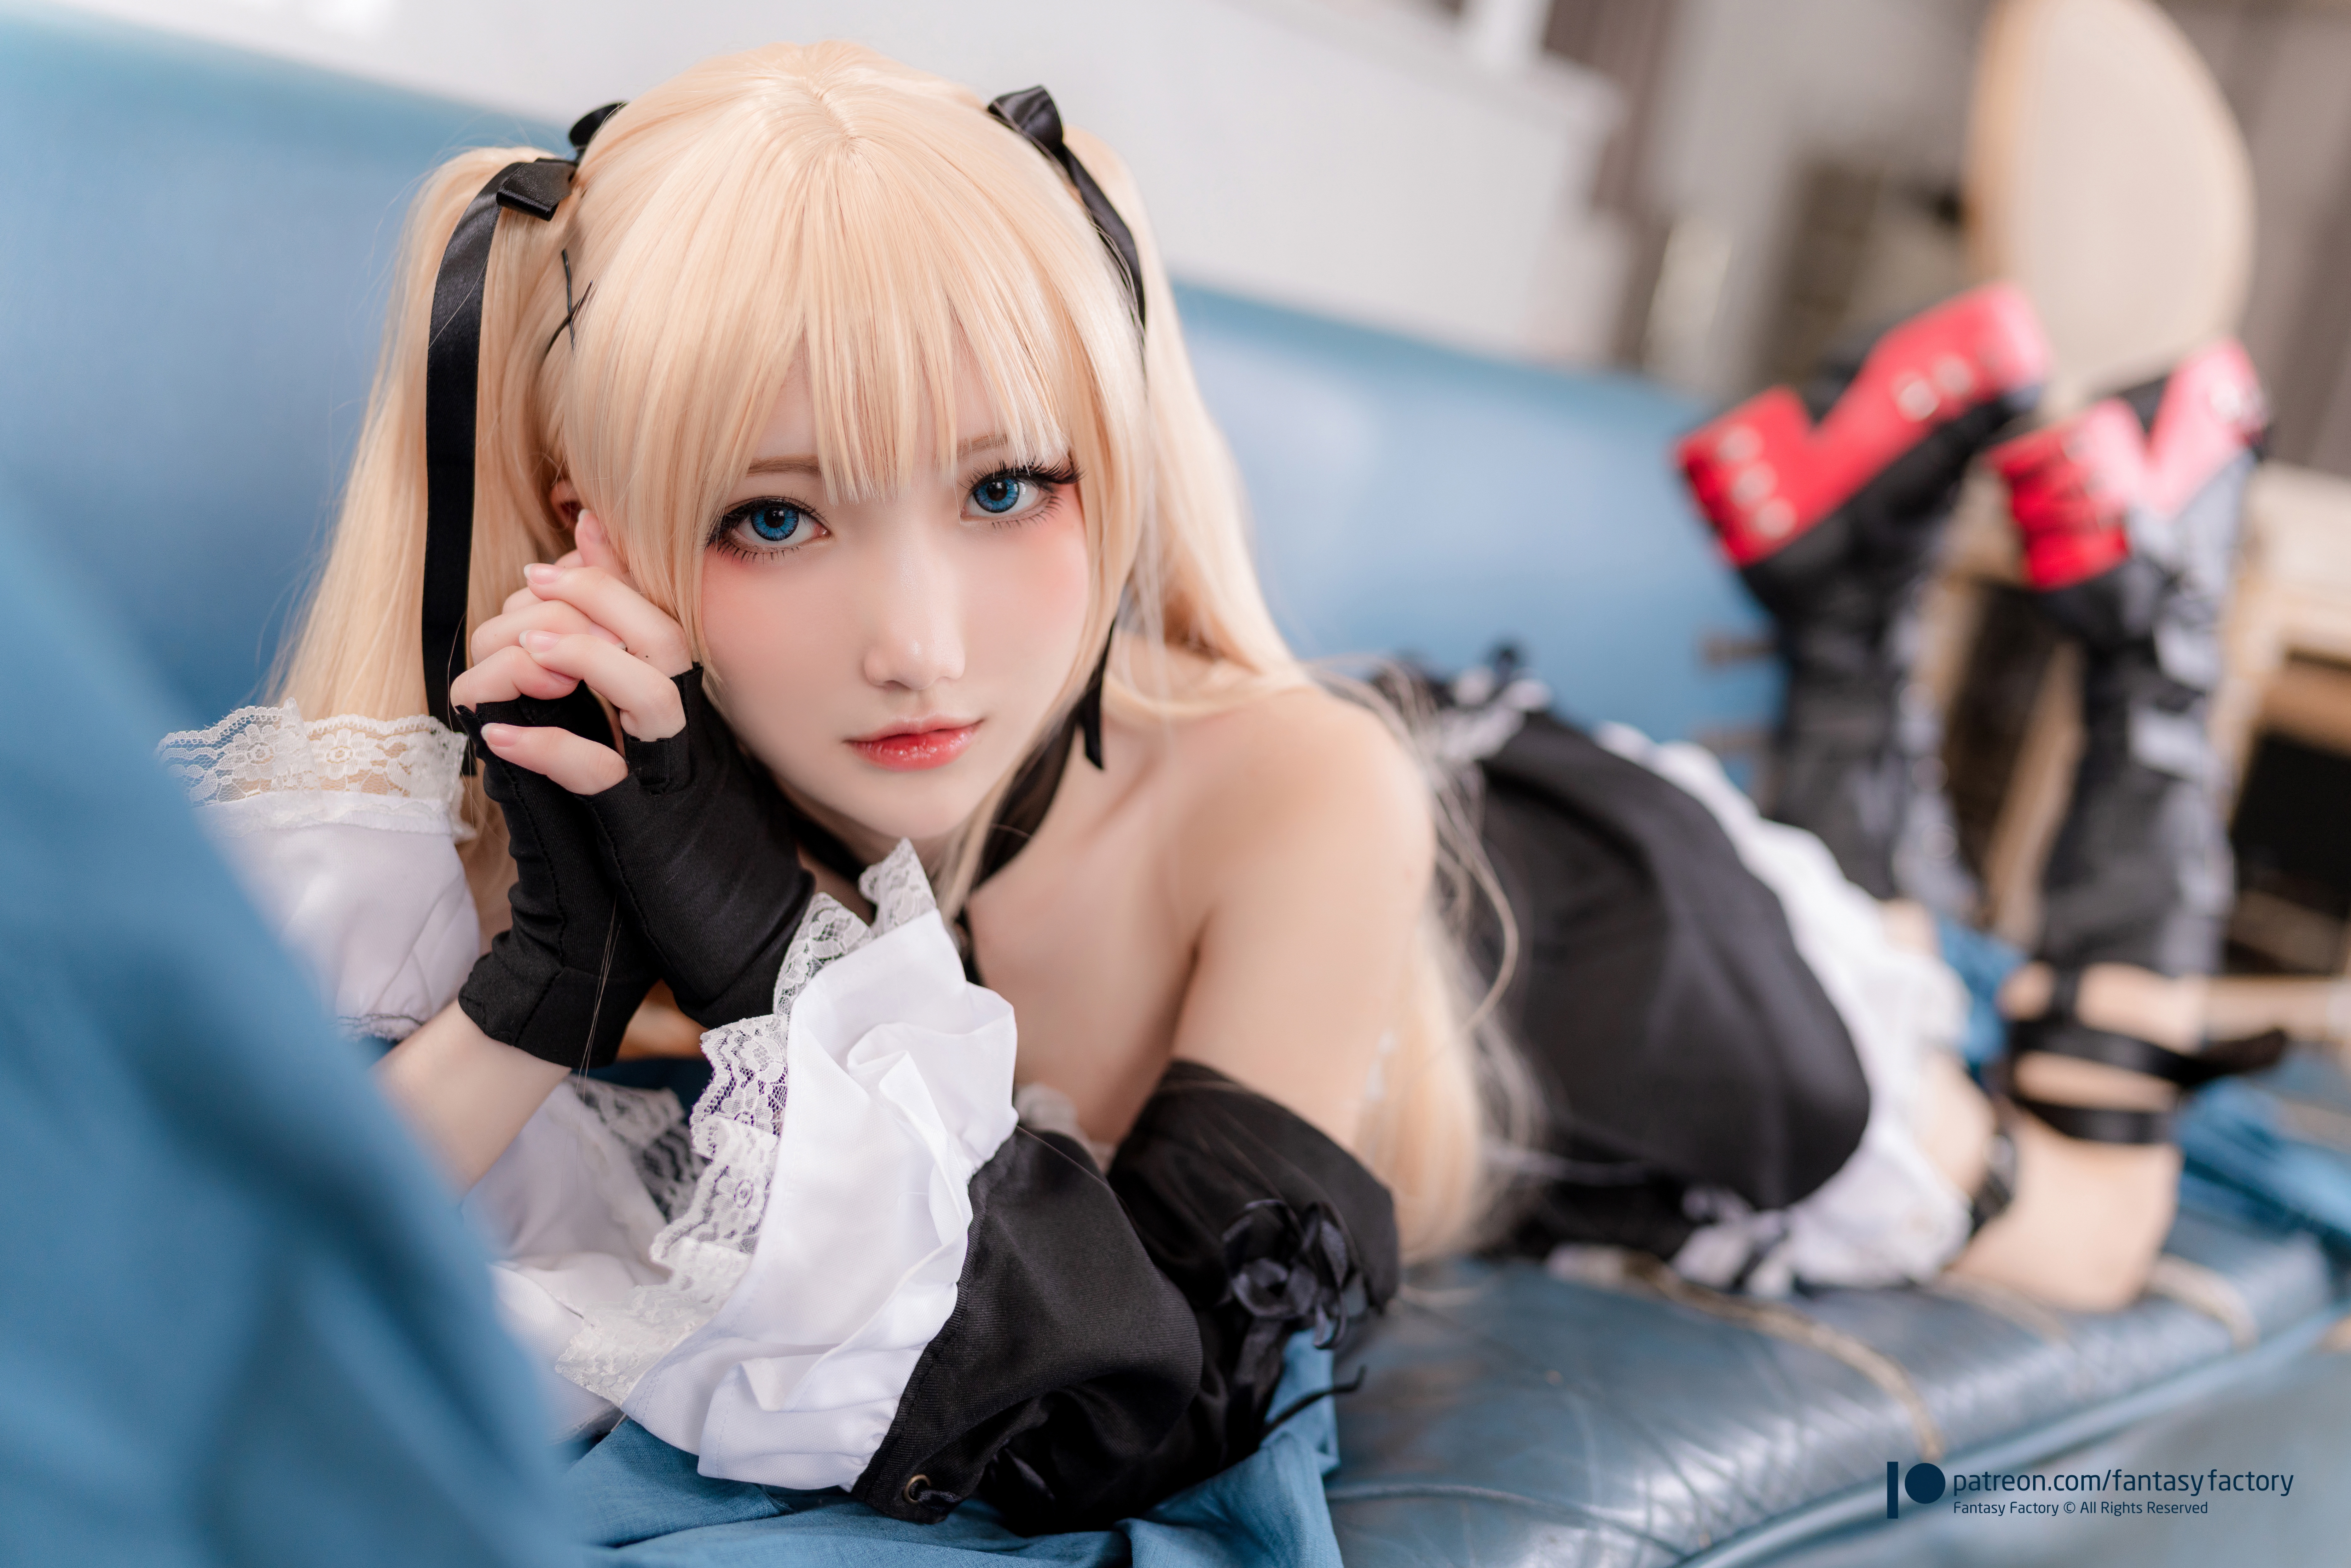 Women Model Asian Cosplay Marie Rose Dead Or Alive Video Games Video Game Girls Gothic Lolita Dress  7459x4975